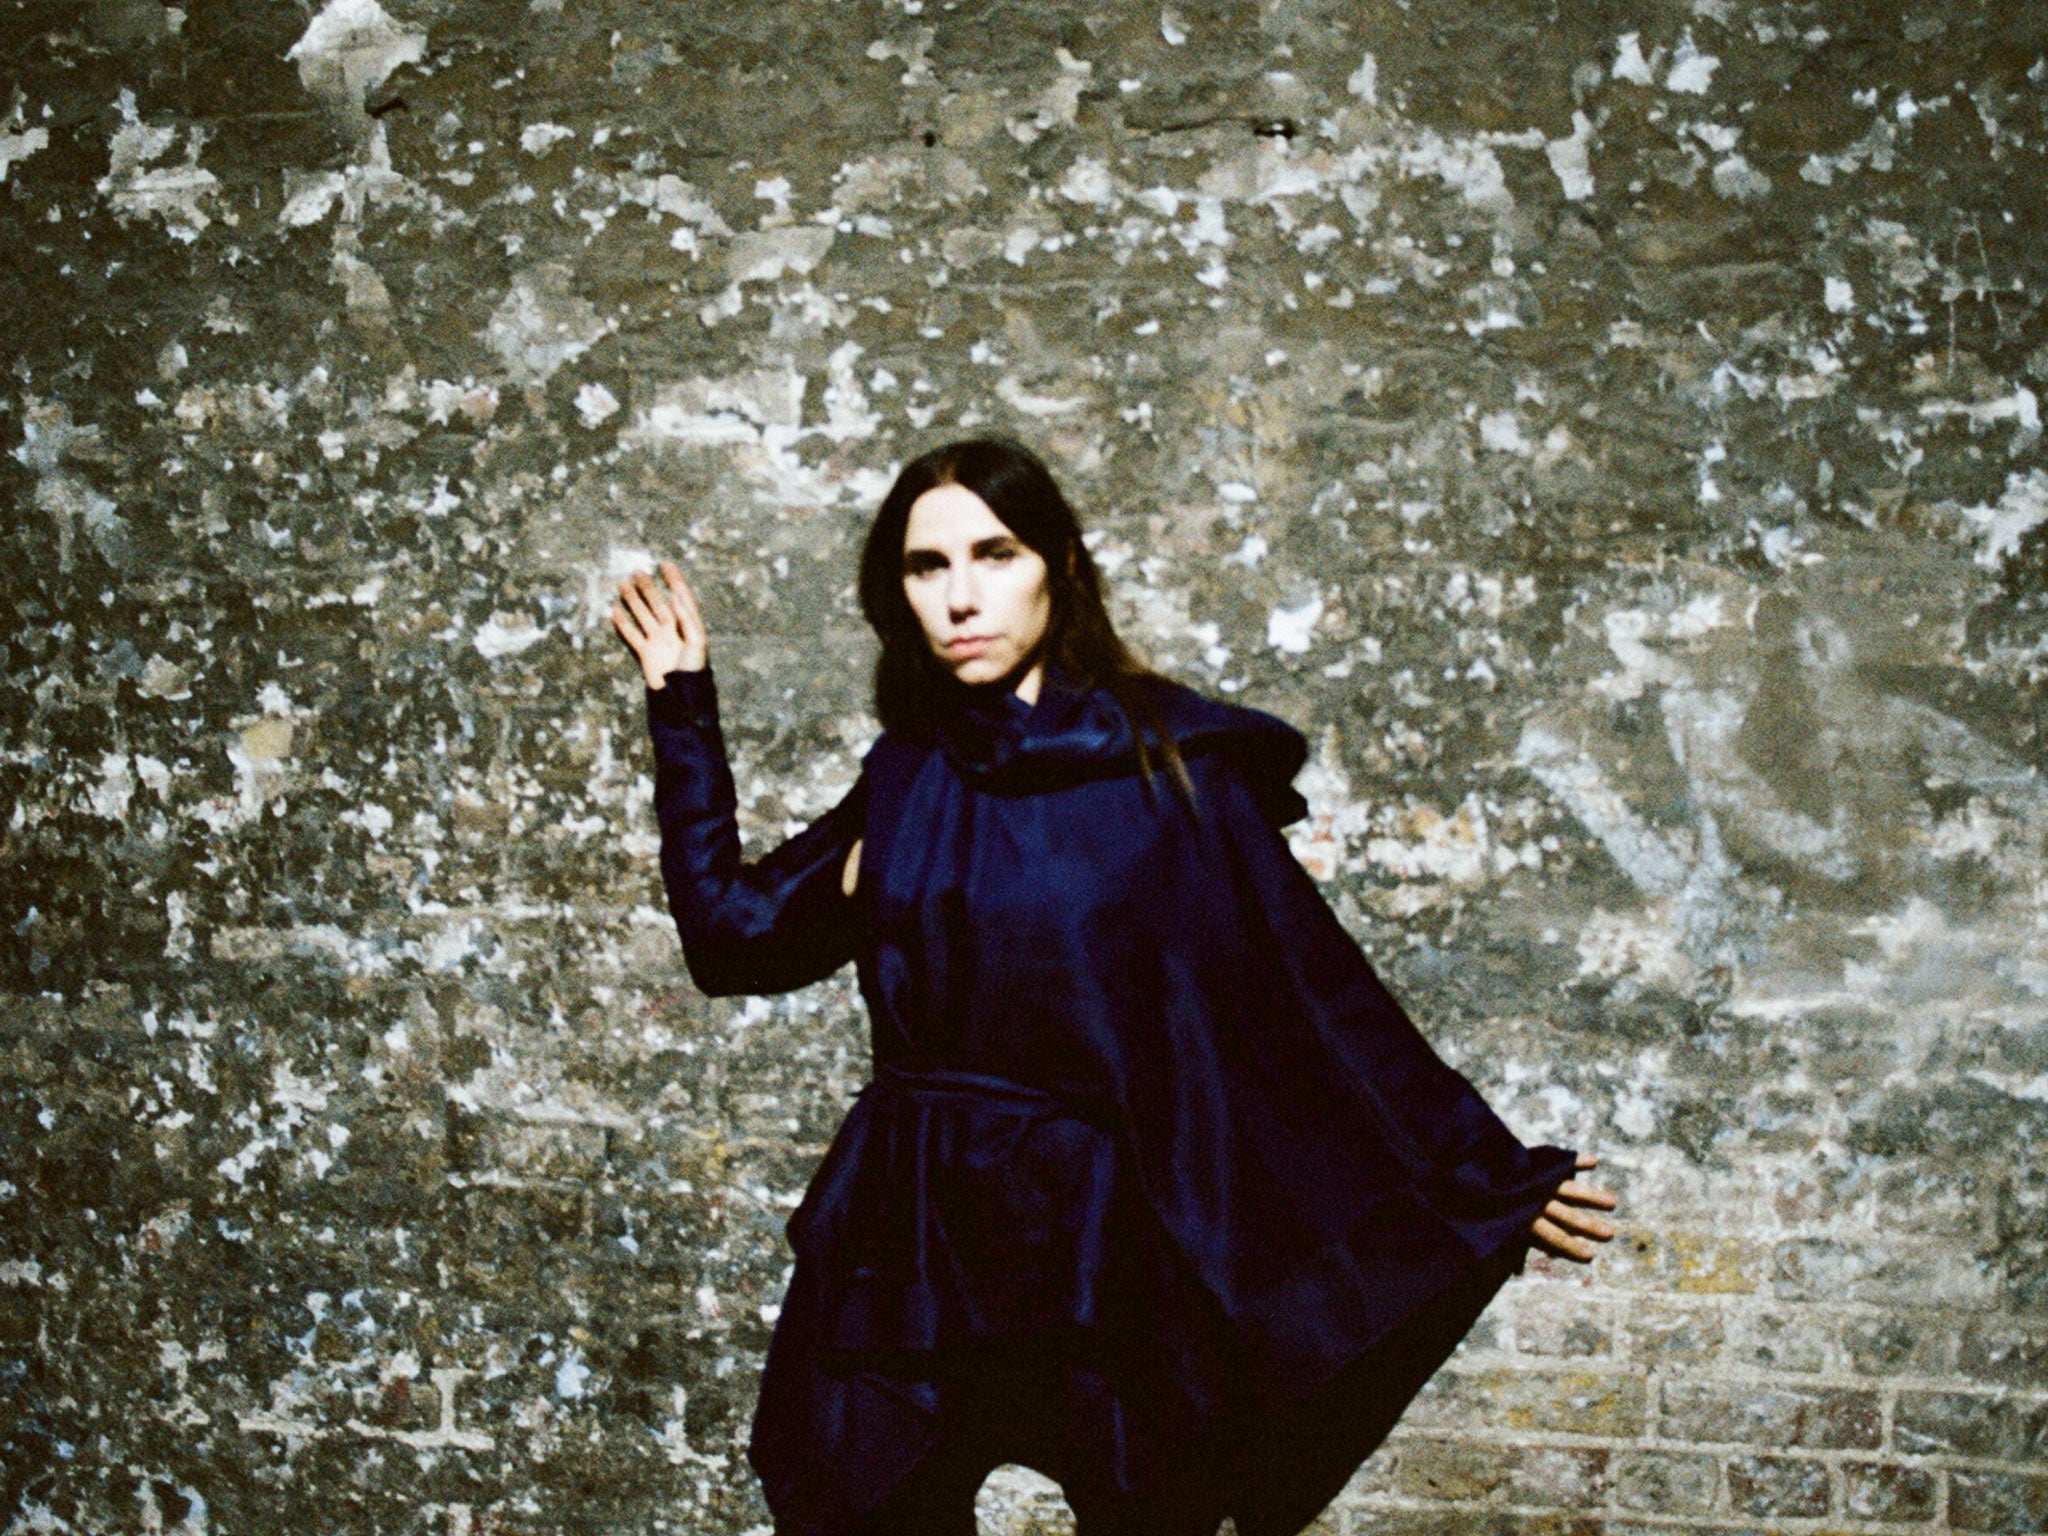 PJ Harvey set to score first UK number one with new album The Hope Six